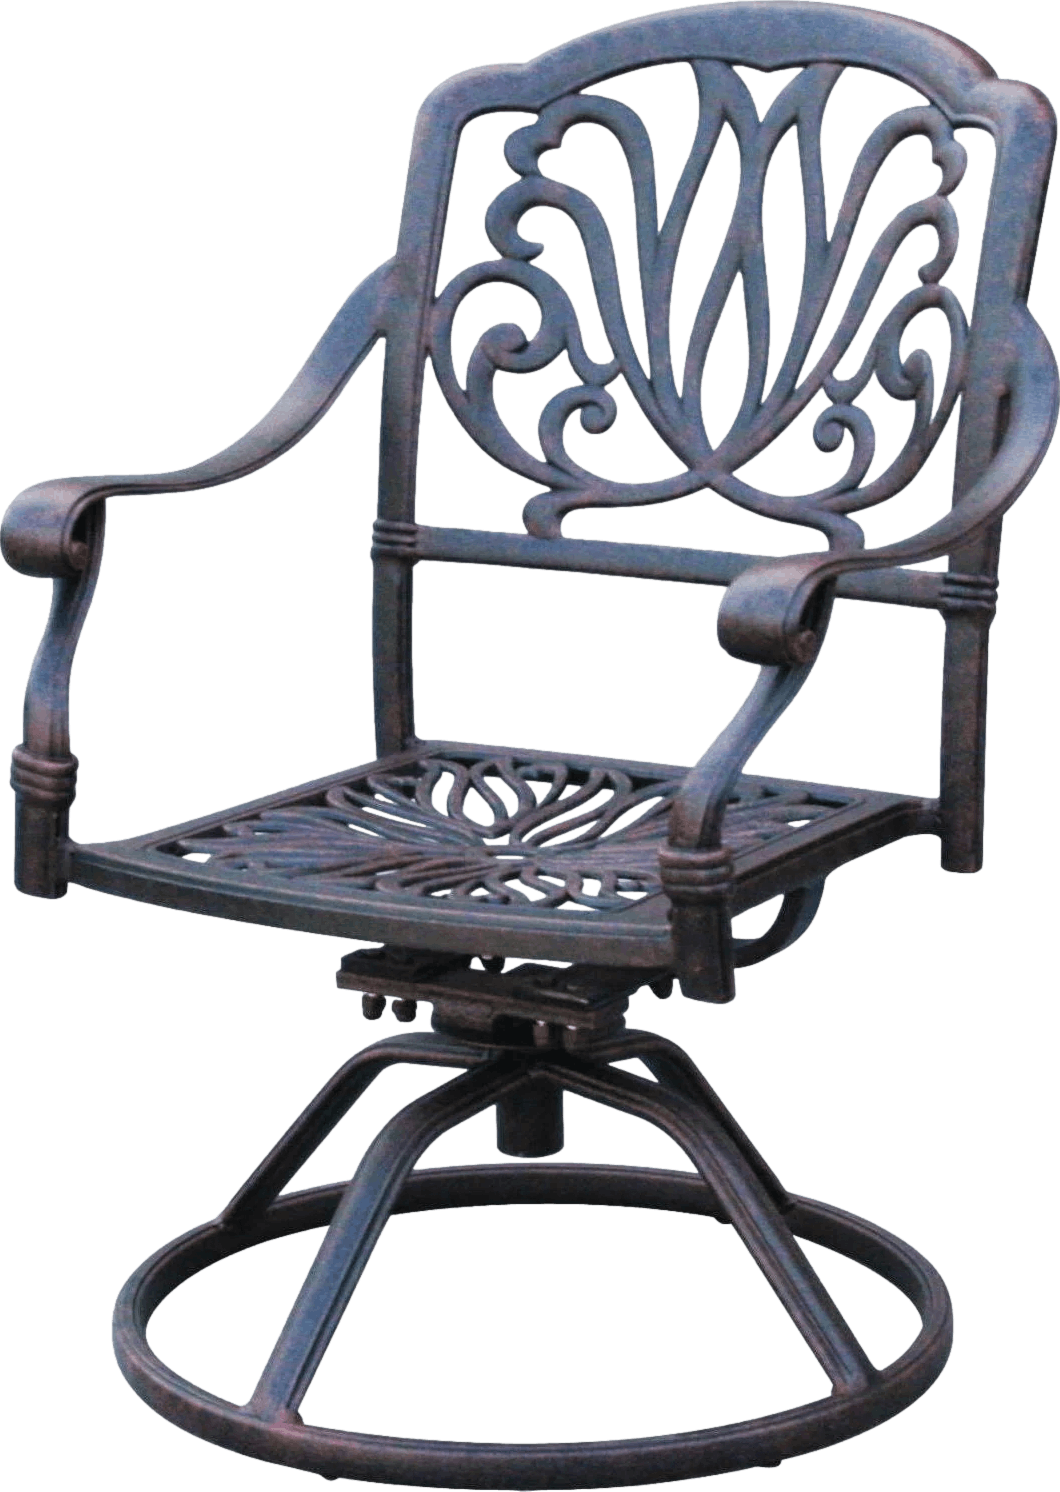 Darlee Elisabeth 3 Piece Cast Aluminum Patio Bistro Set With Swivel Rocker Chairs & End Table With Ice Bucket Insert